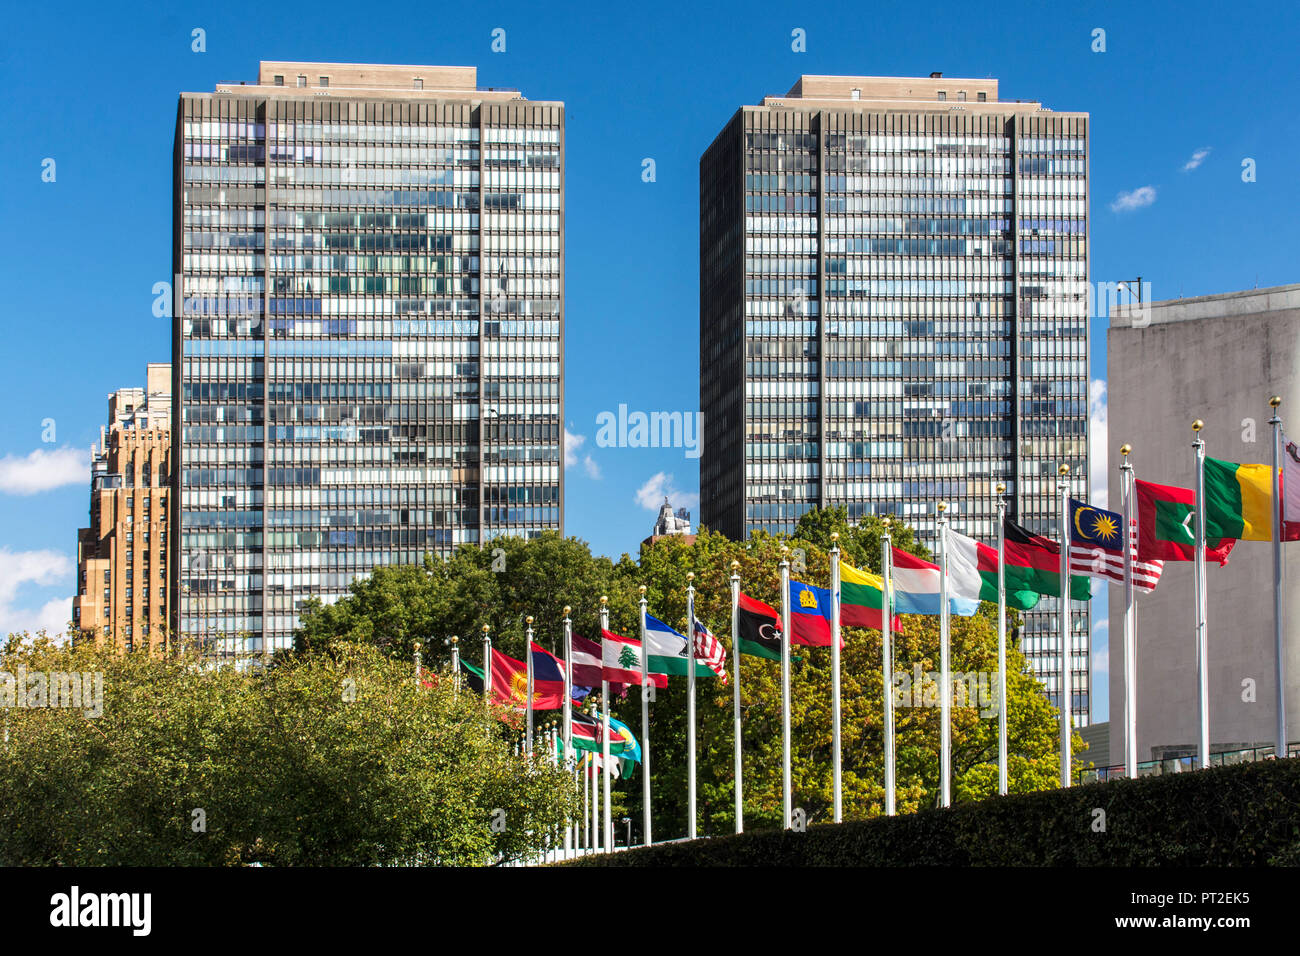 UN Plaza of New York in the USA Stock Photo